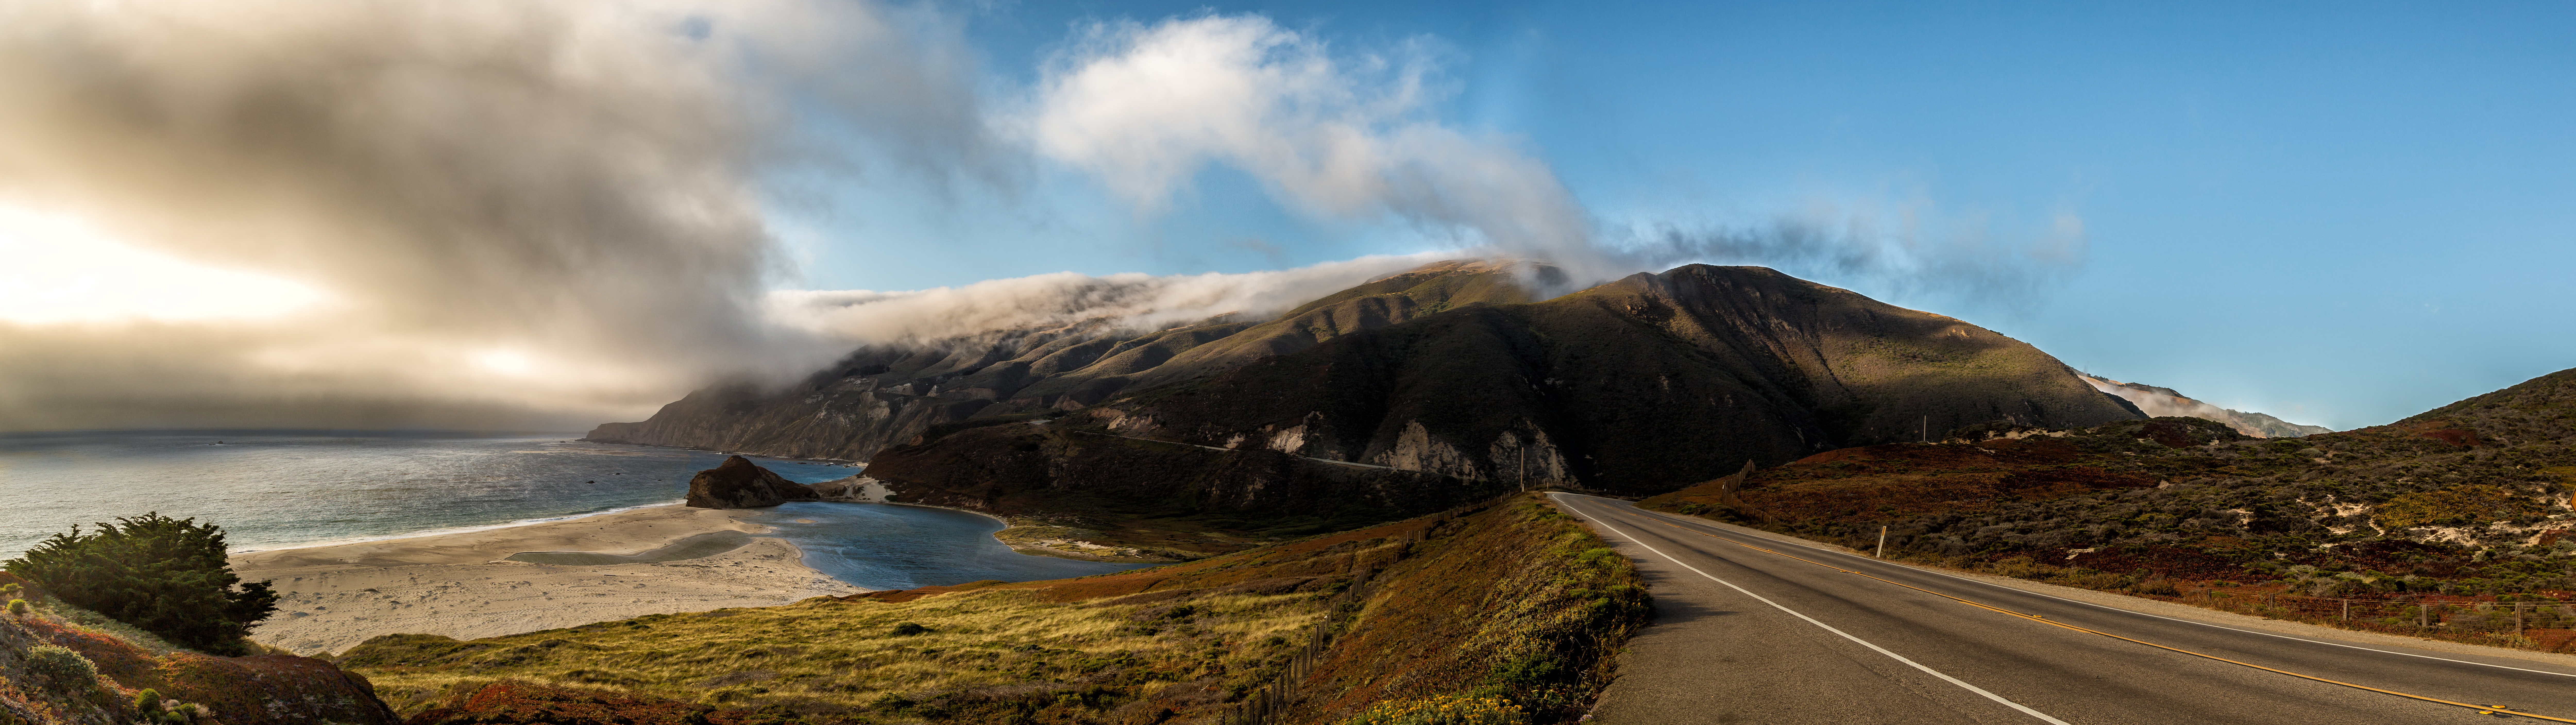 gray concrete road near body of water and mountains, big sur